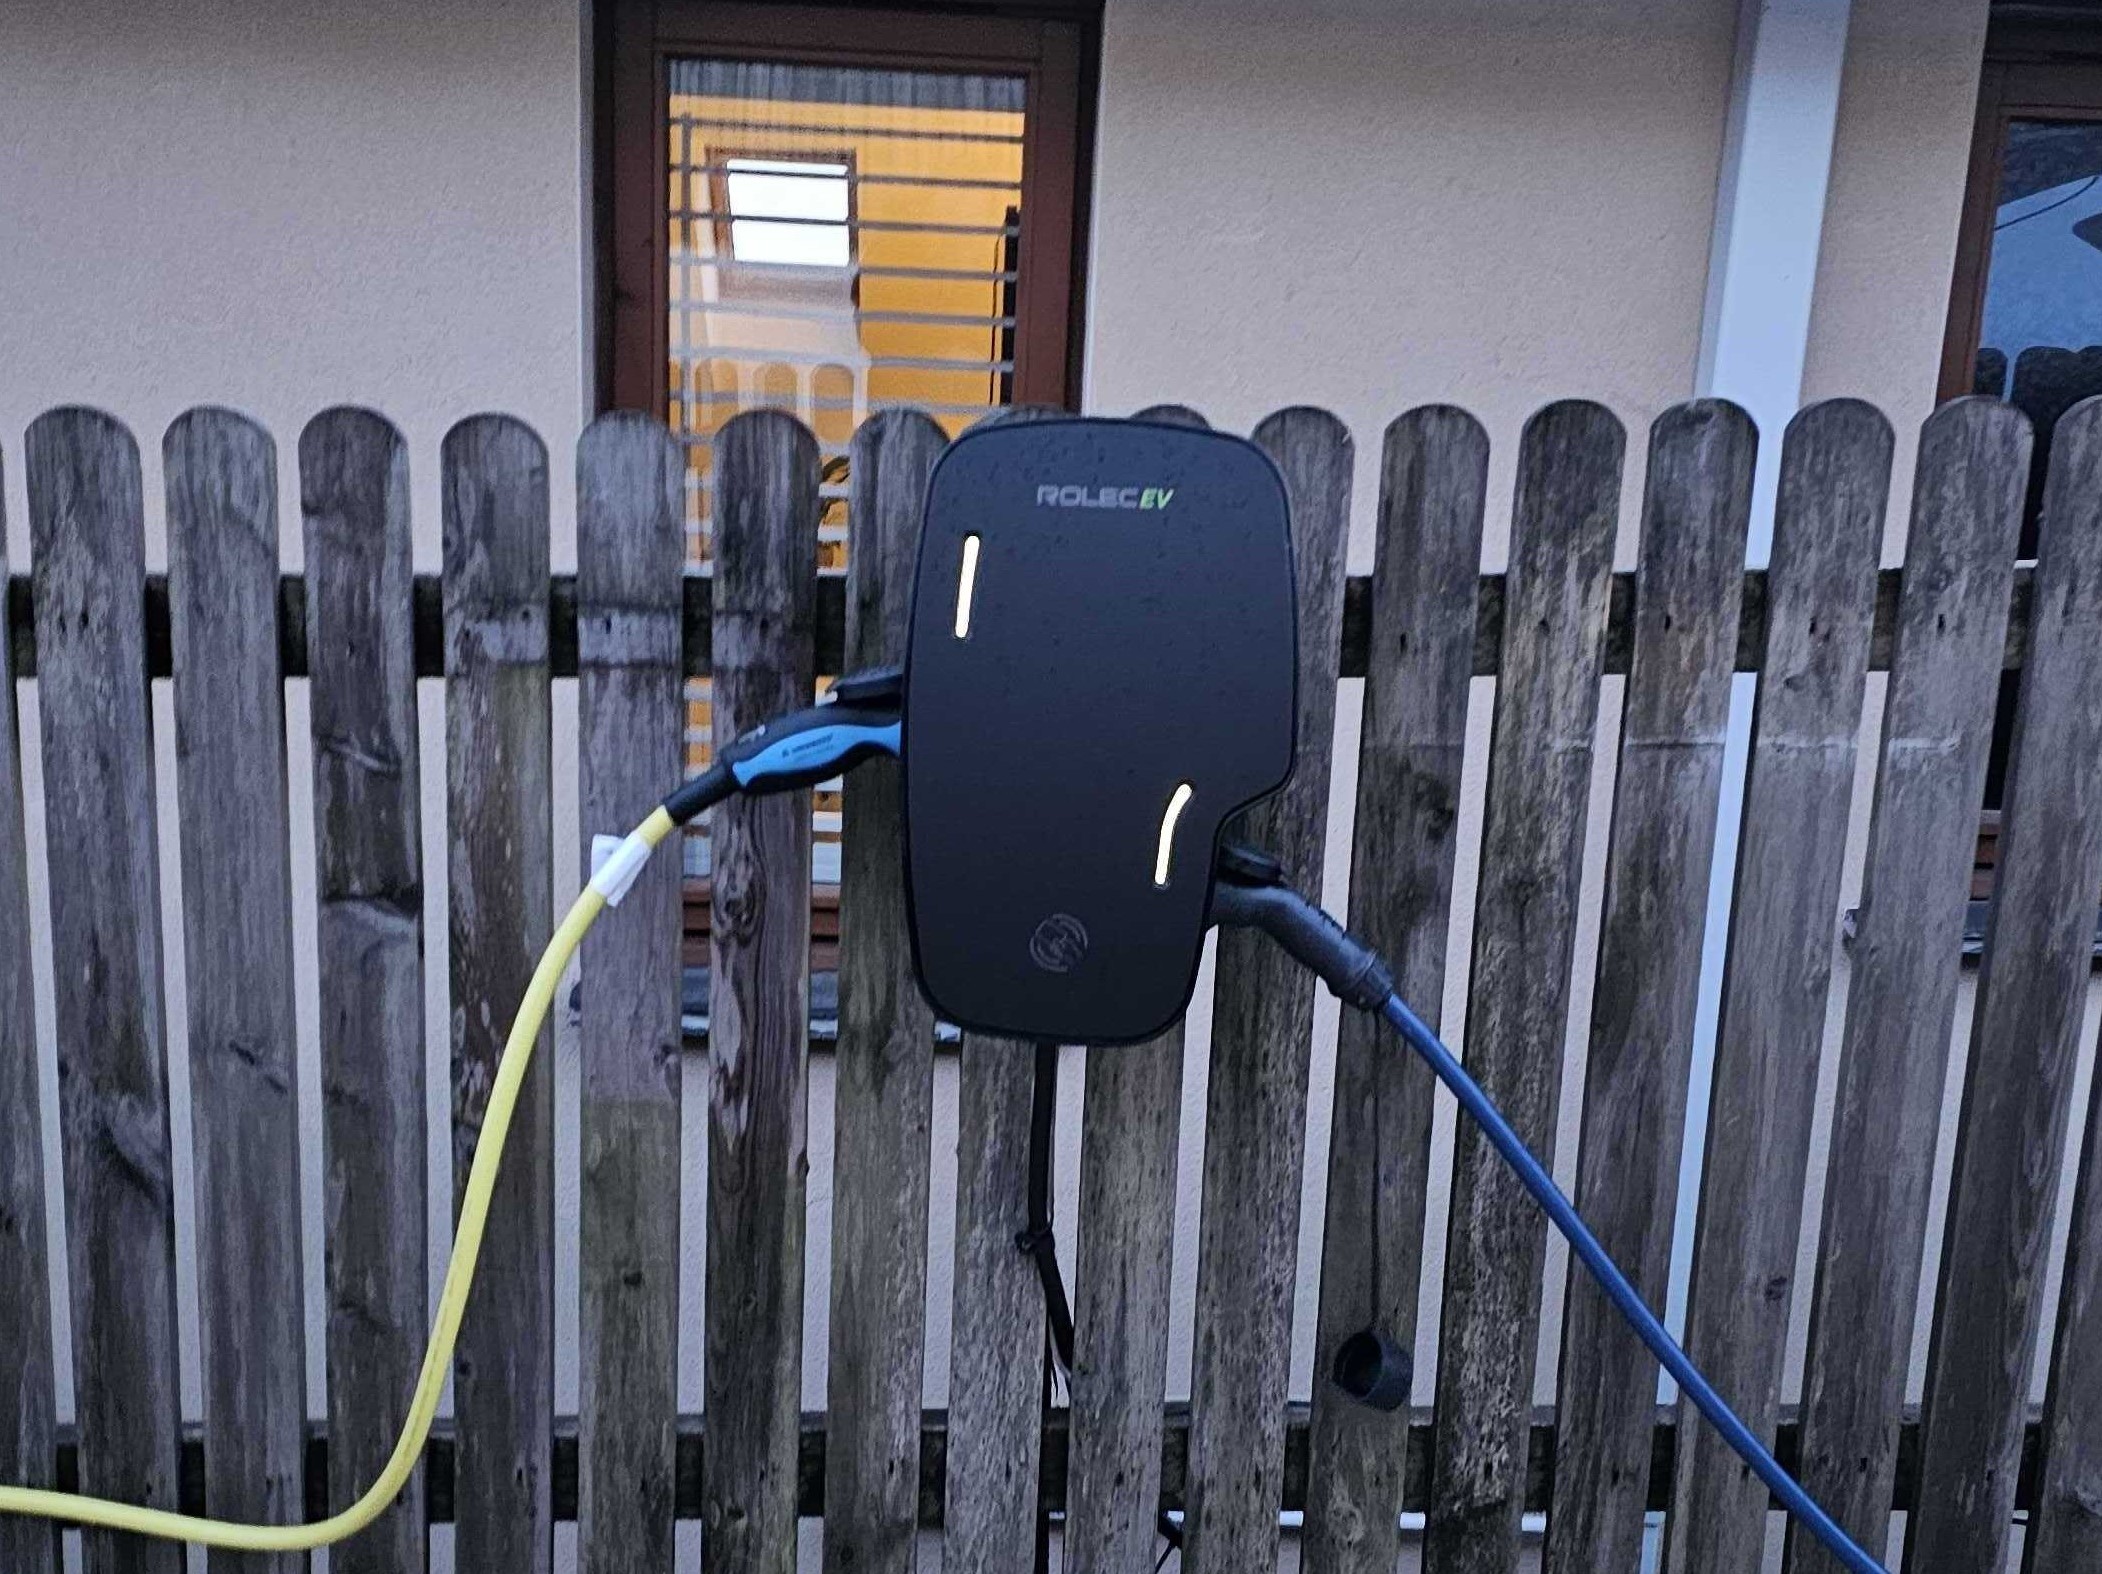 My Rolec EV home charger.